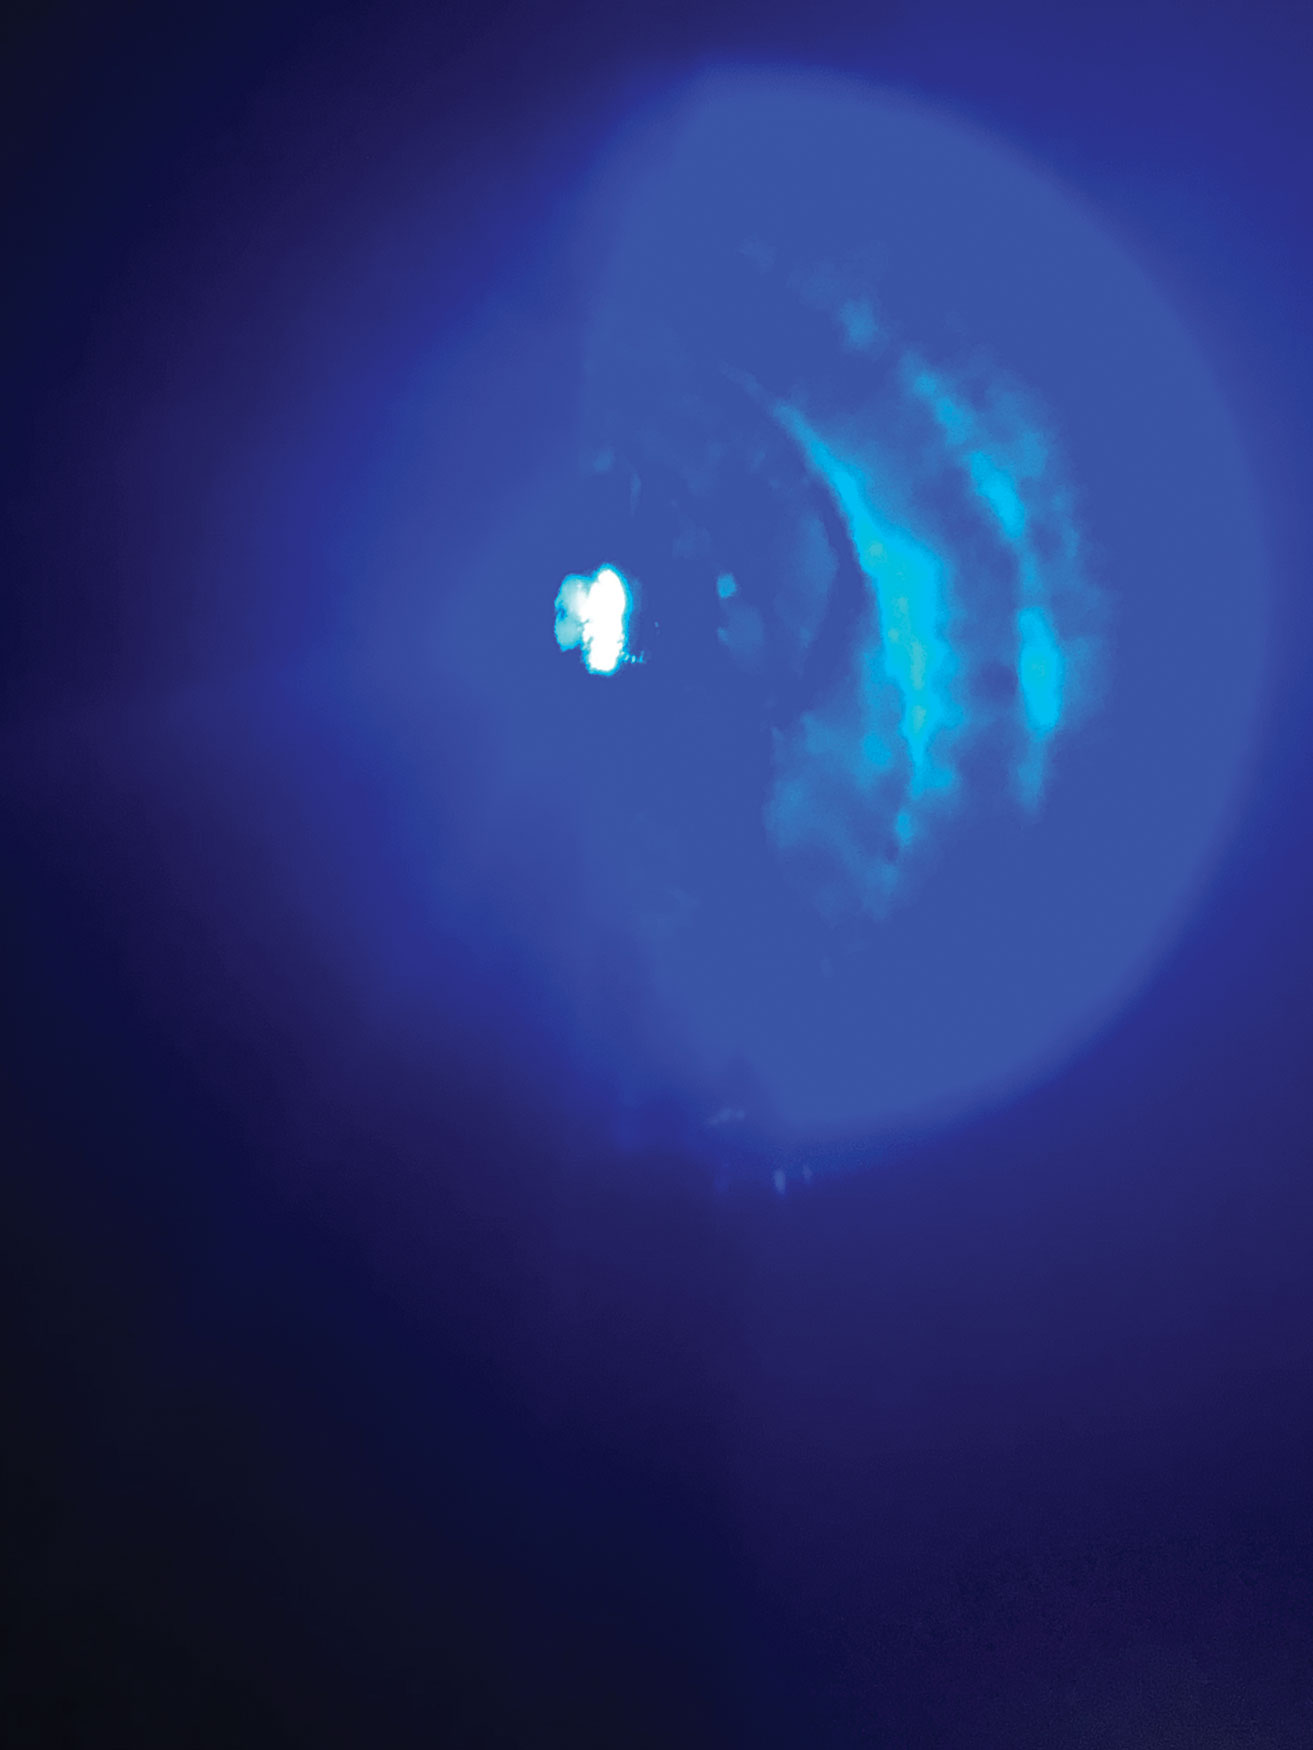 Corneal molding and staining with a tight-fitting hybrid lens.